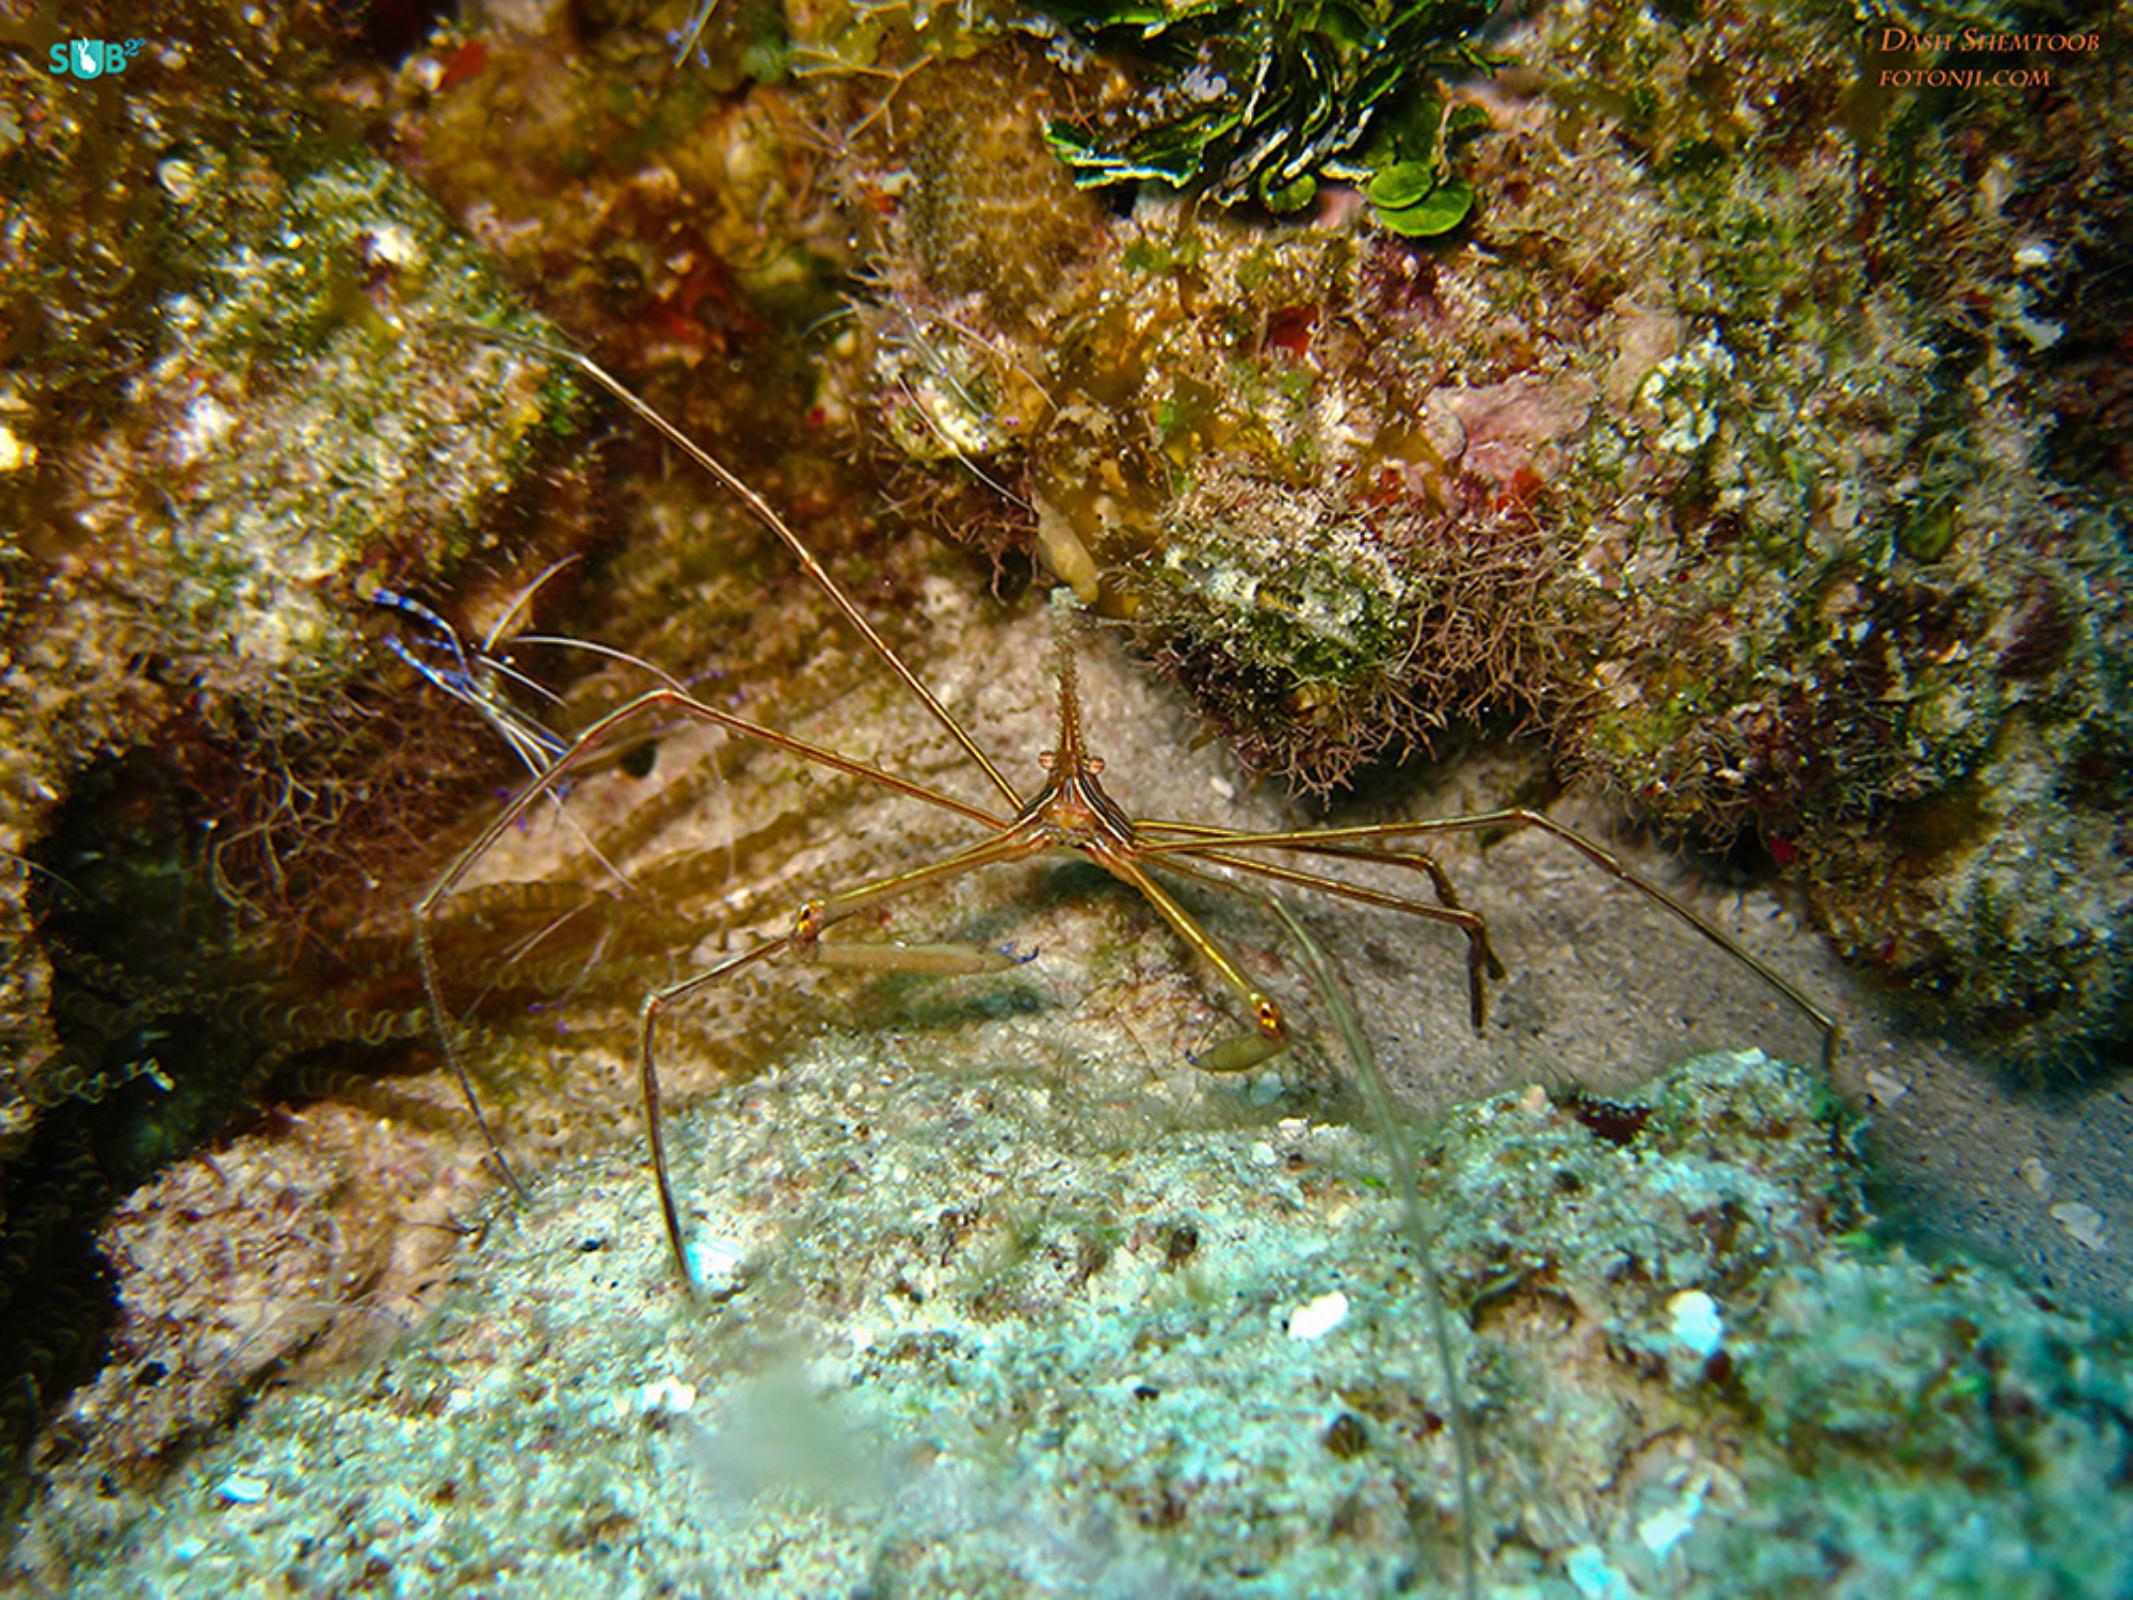 Arrow crab and cleaning shrimp stay close to their hideaway [1/60, f2.8, ISO250]